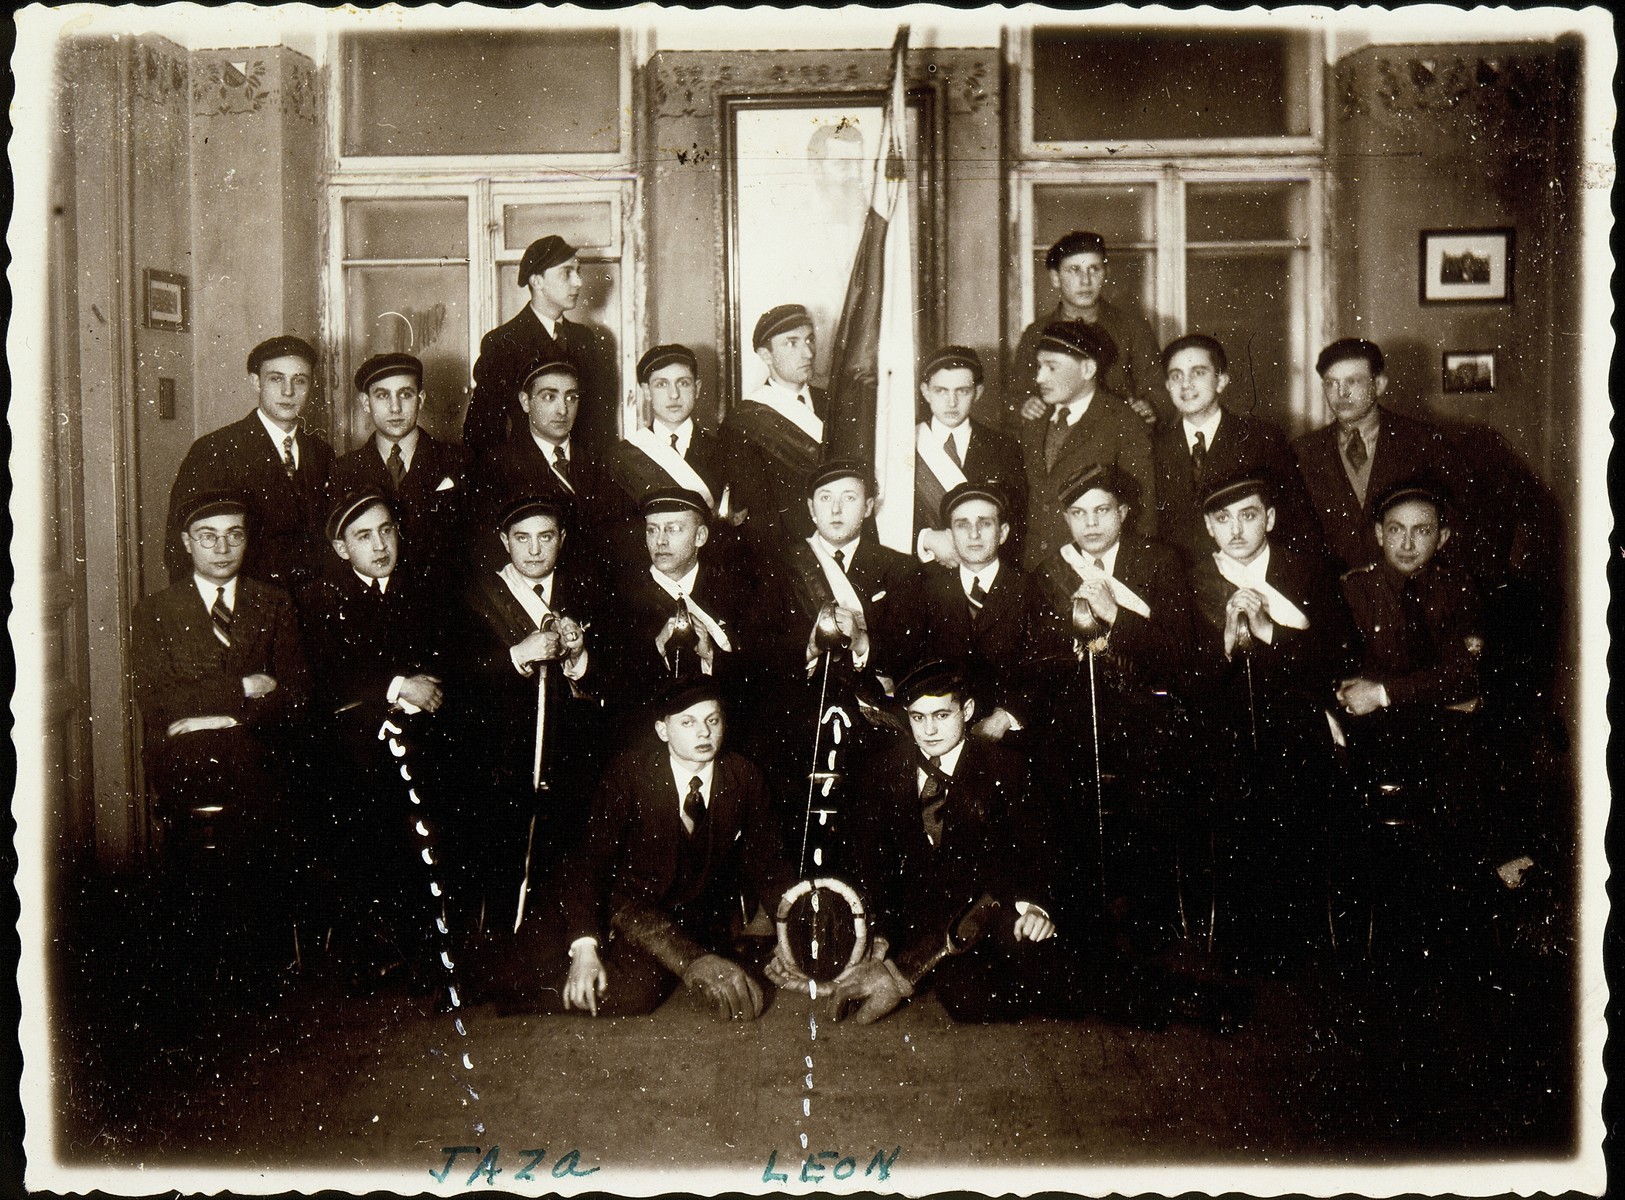 Members of the Jewish medical student fraternity at Vilna University.

Jews were excluded from the Polish student fraternity and therefore formed their own.  Among those pictured are Jasza Saposnikow, son of Sonia Saposnikow (middle row, second from the left), Leon Gordon  (middle row, fifth from the left), Yehoshua Fishman (middle row, far right).  Both Jasza and Leon perished during the Holocaust.